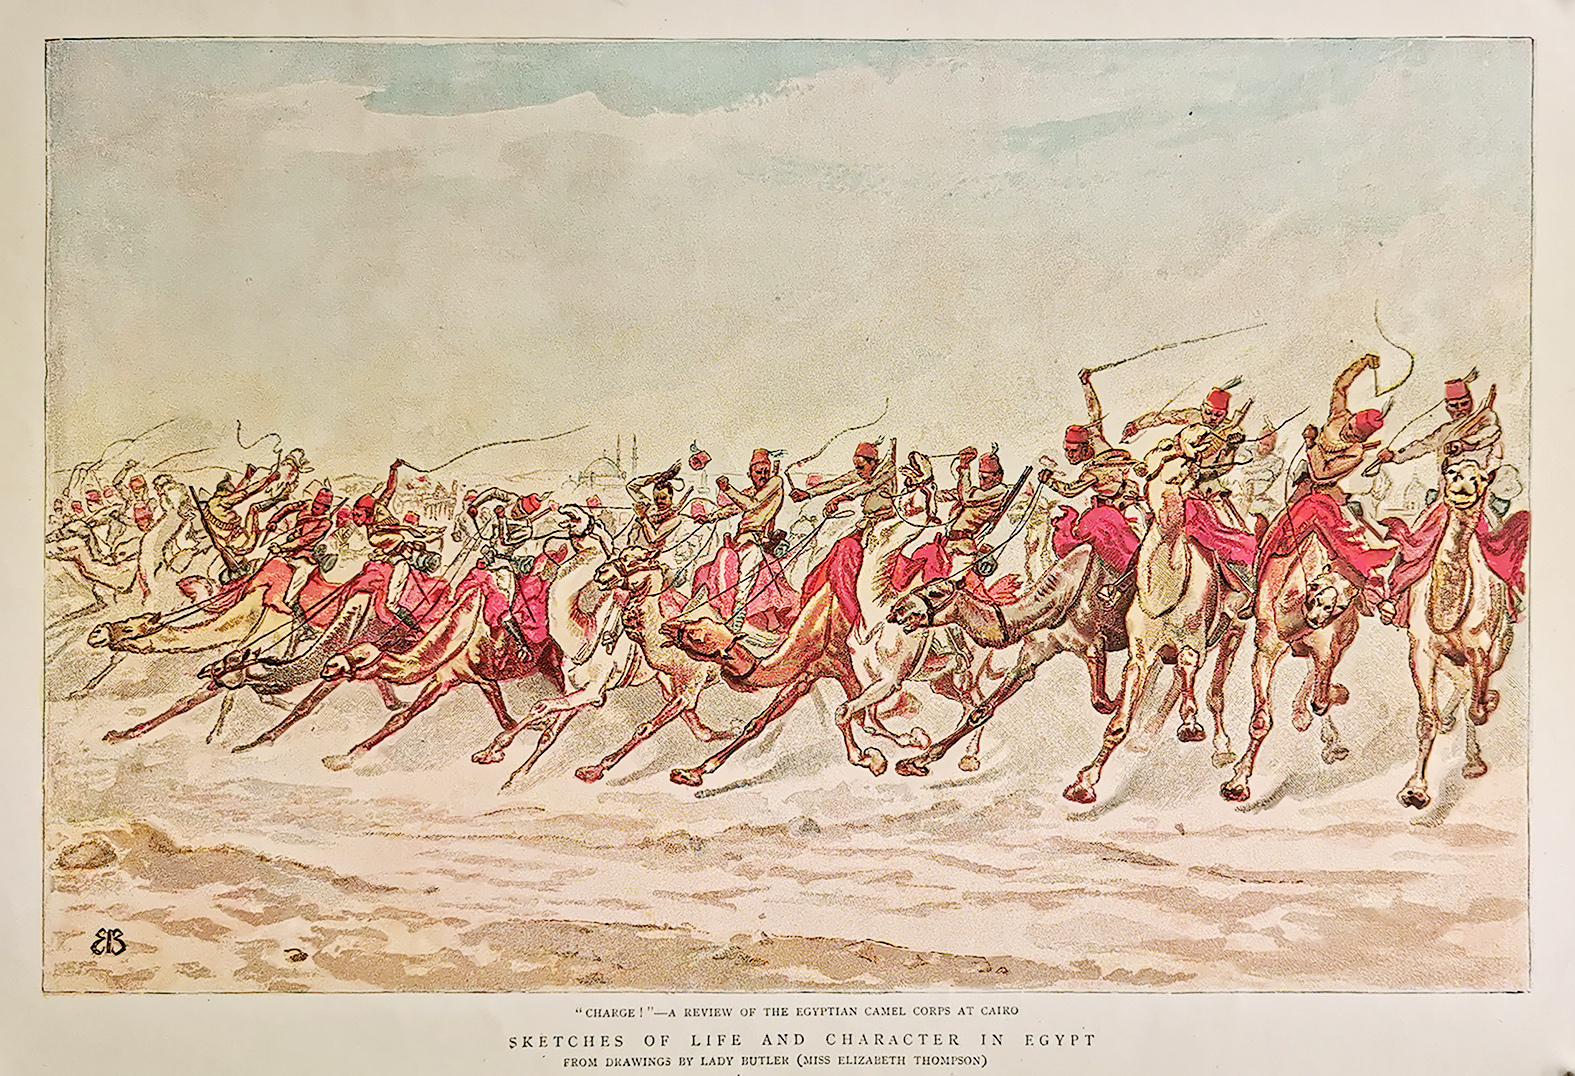 "Charge!" - A Review of the Egyptian Camel Corps at Cairo - Antique Print from 1889